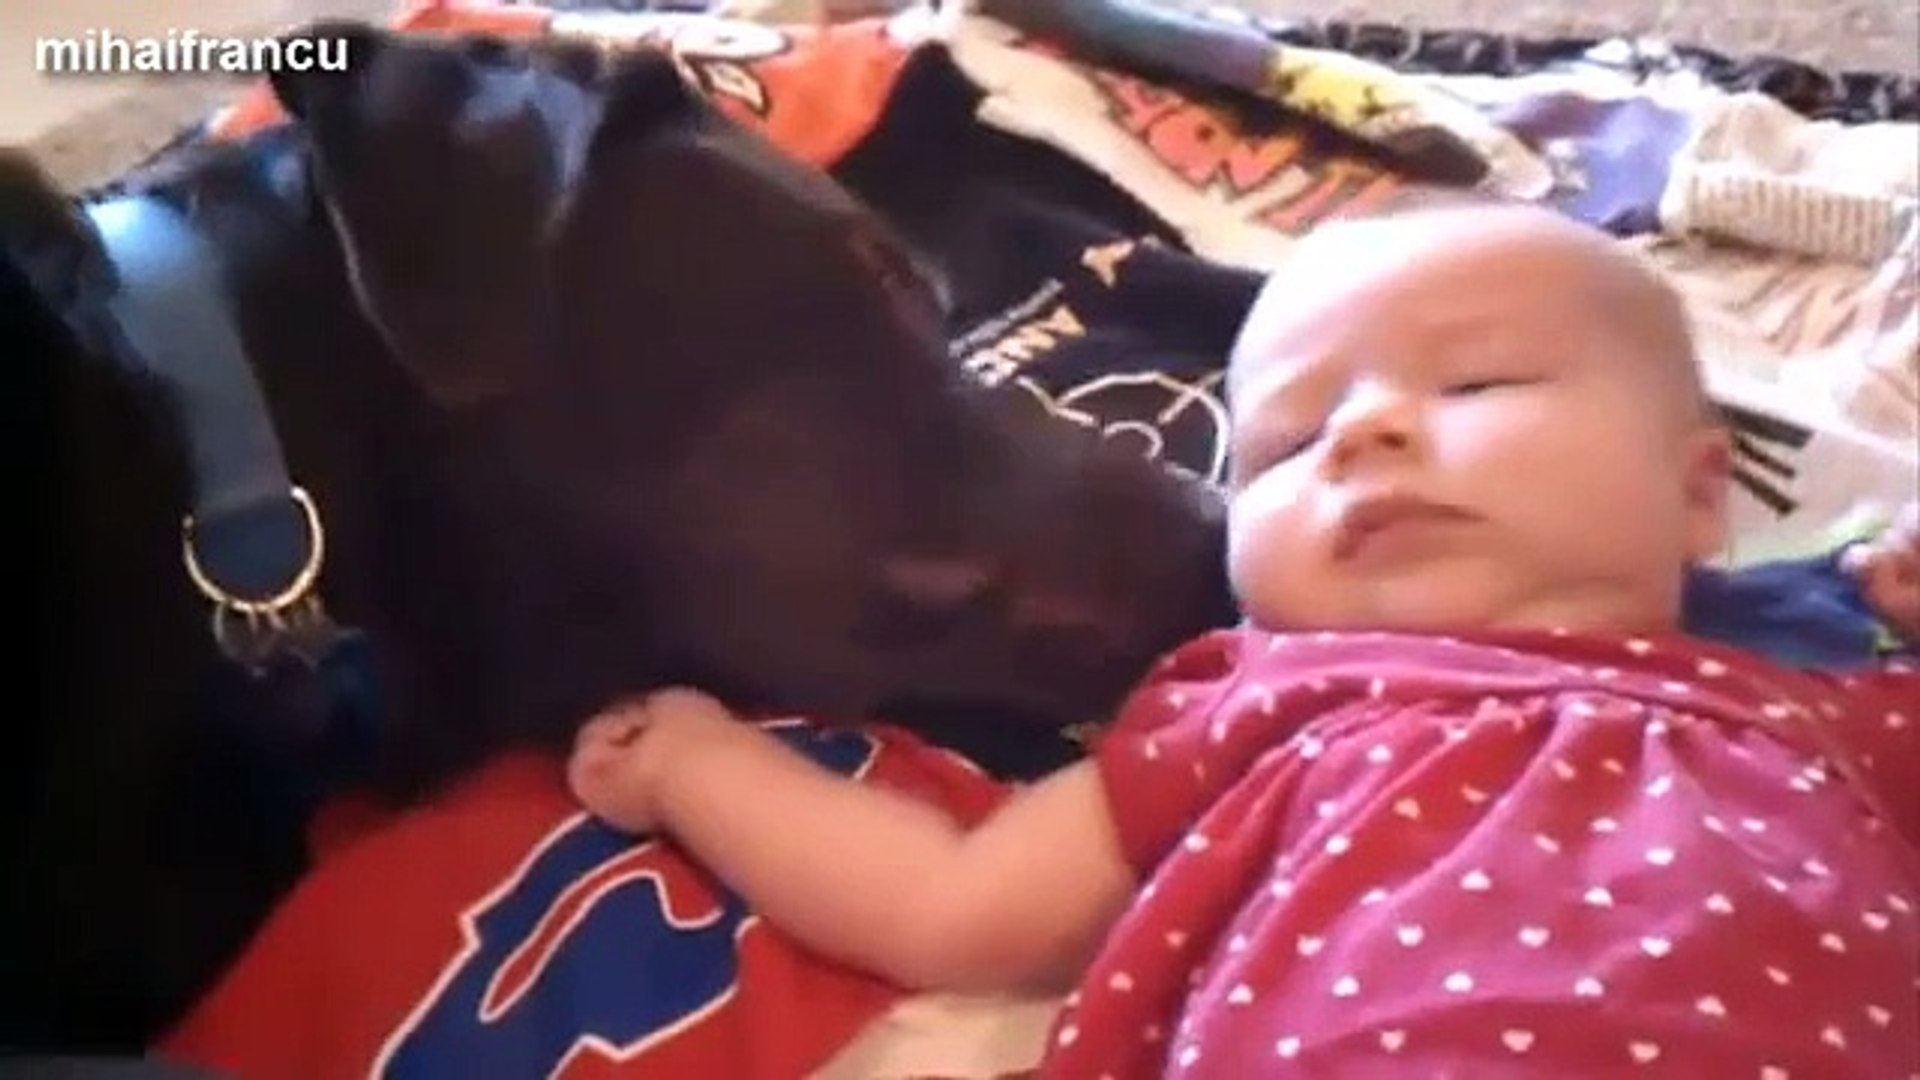 Dogs Love Babies Compilation 2014 [NEW]